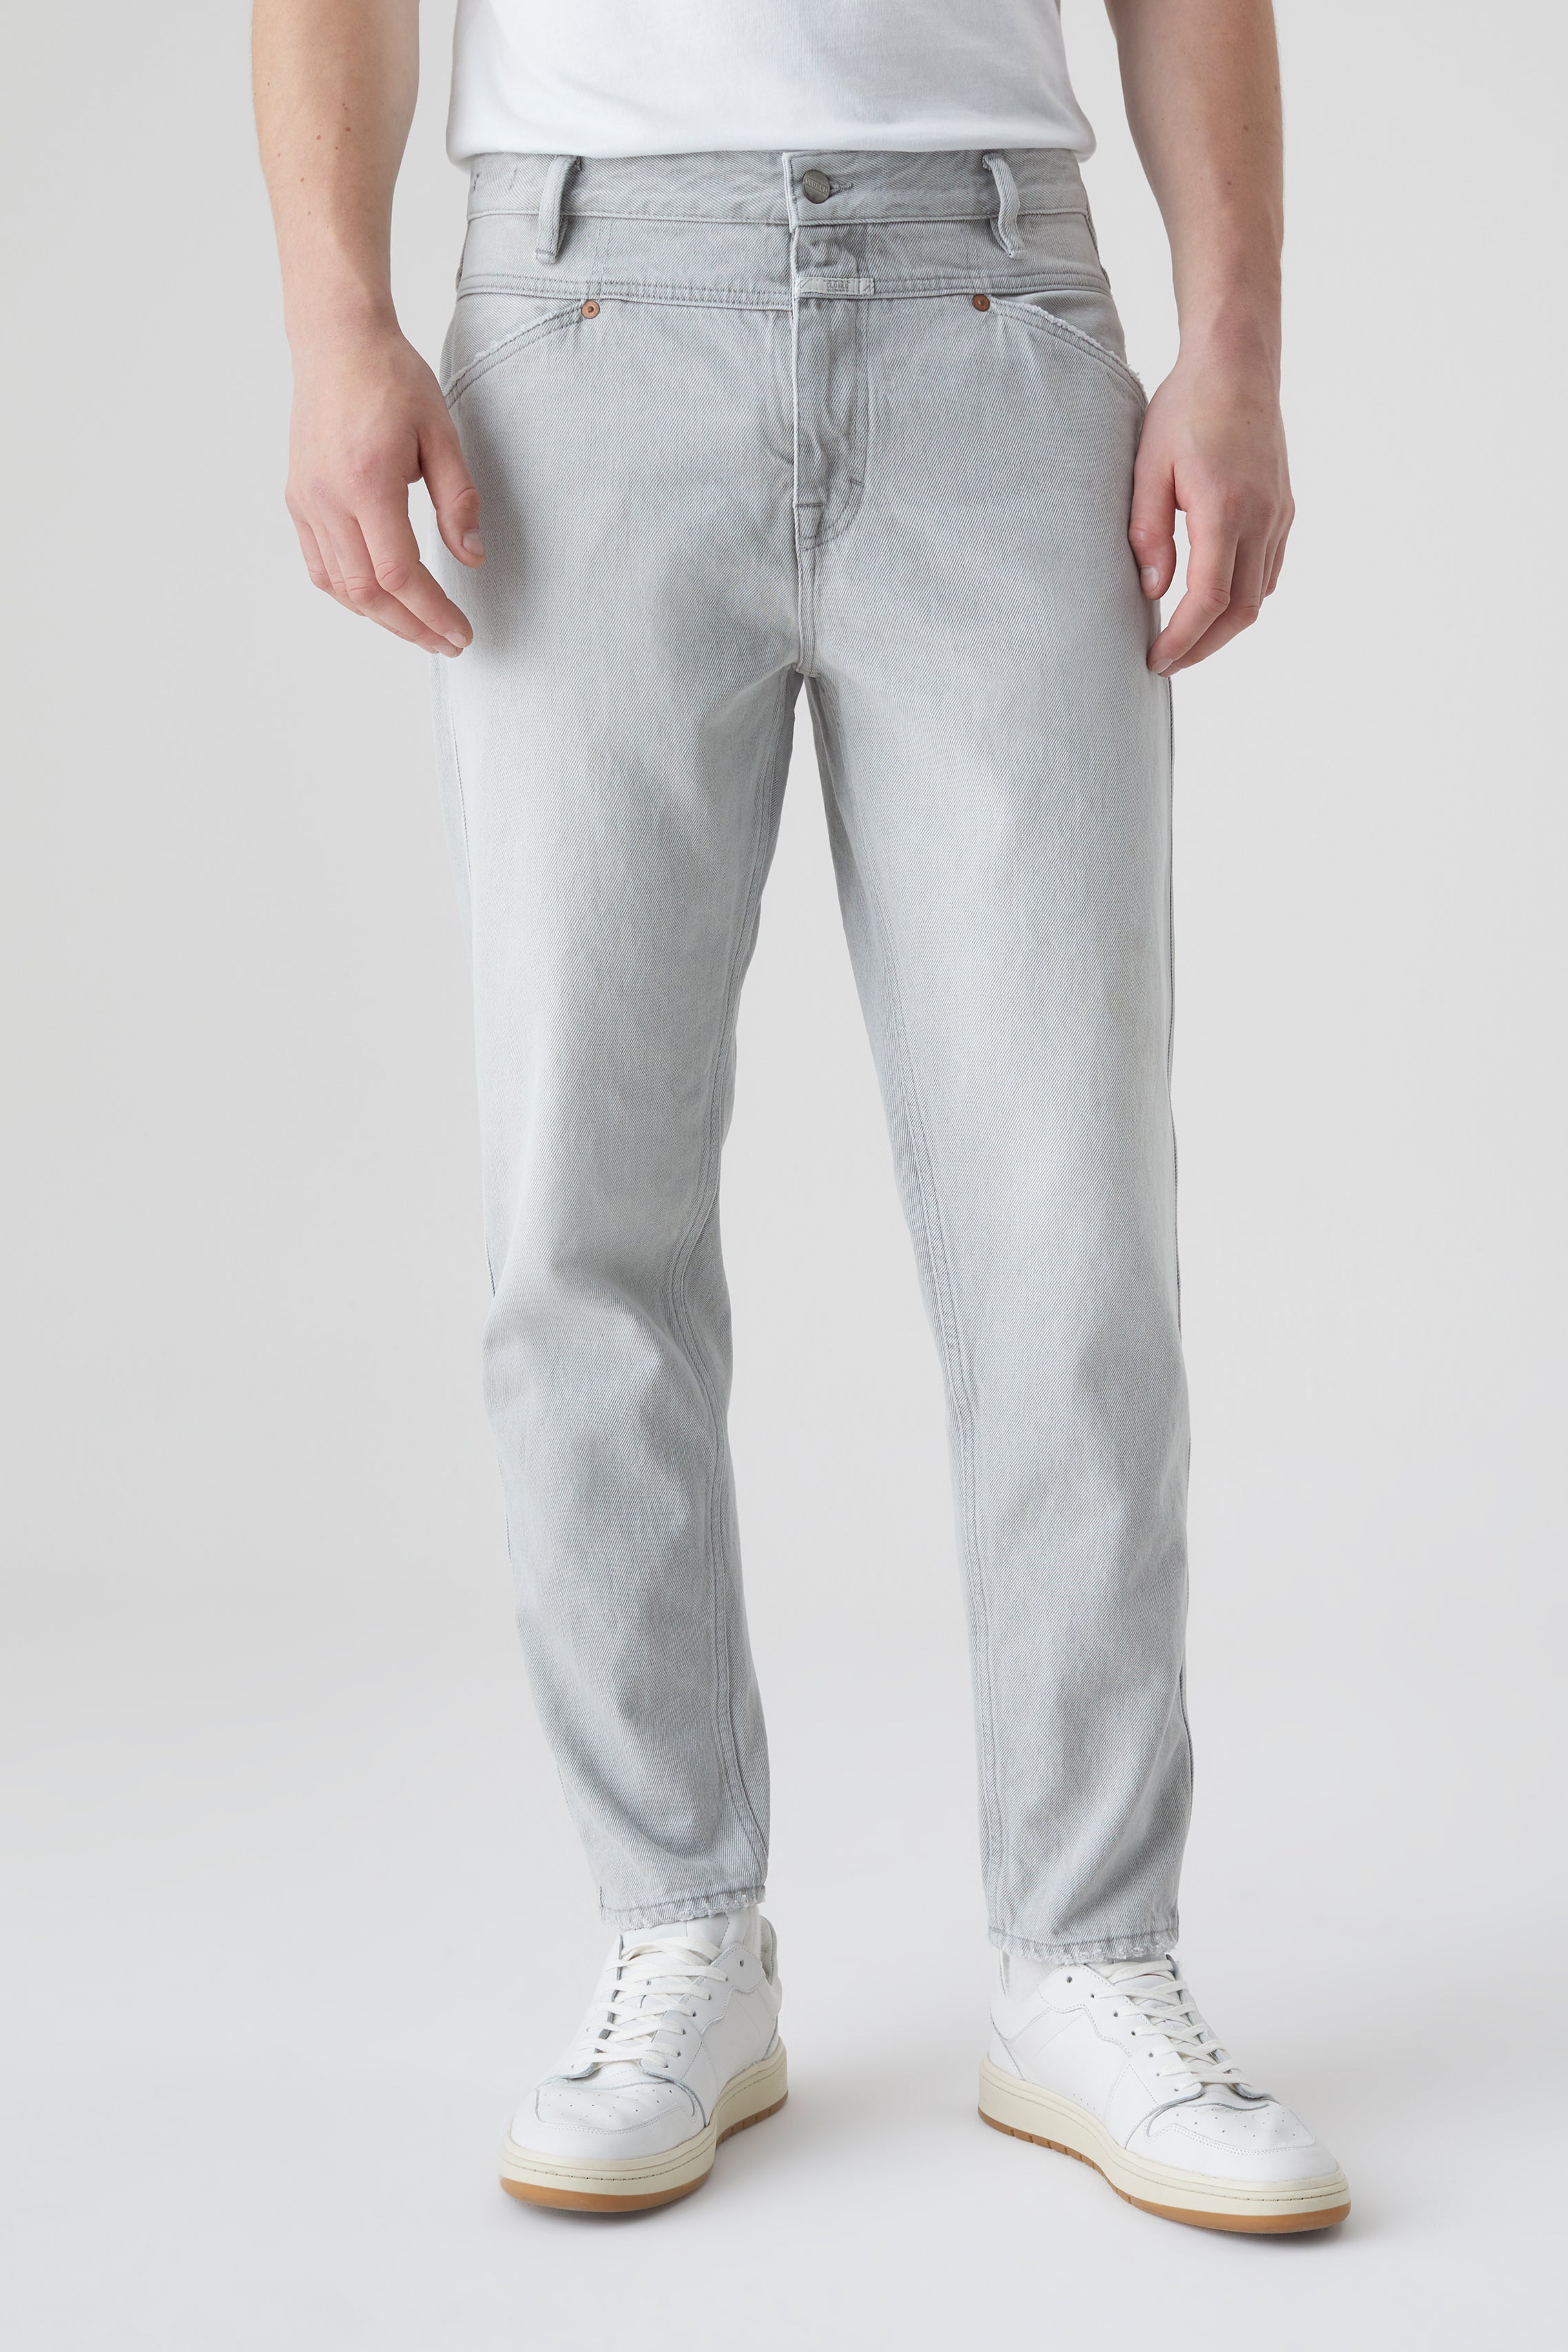 CLOSED-OUTLET-SALE-STYLE-NAME-X-LENT-TAPERED-JEANS-Hosen-ARCHIVE-COLLECTION-2_542d9d01-be03-4bf1-adb3-ee32f1e79a19.jpg